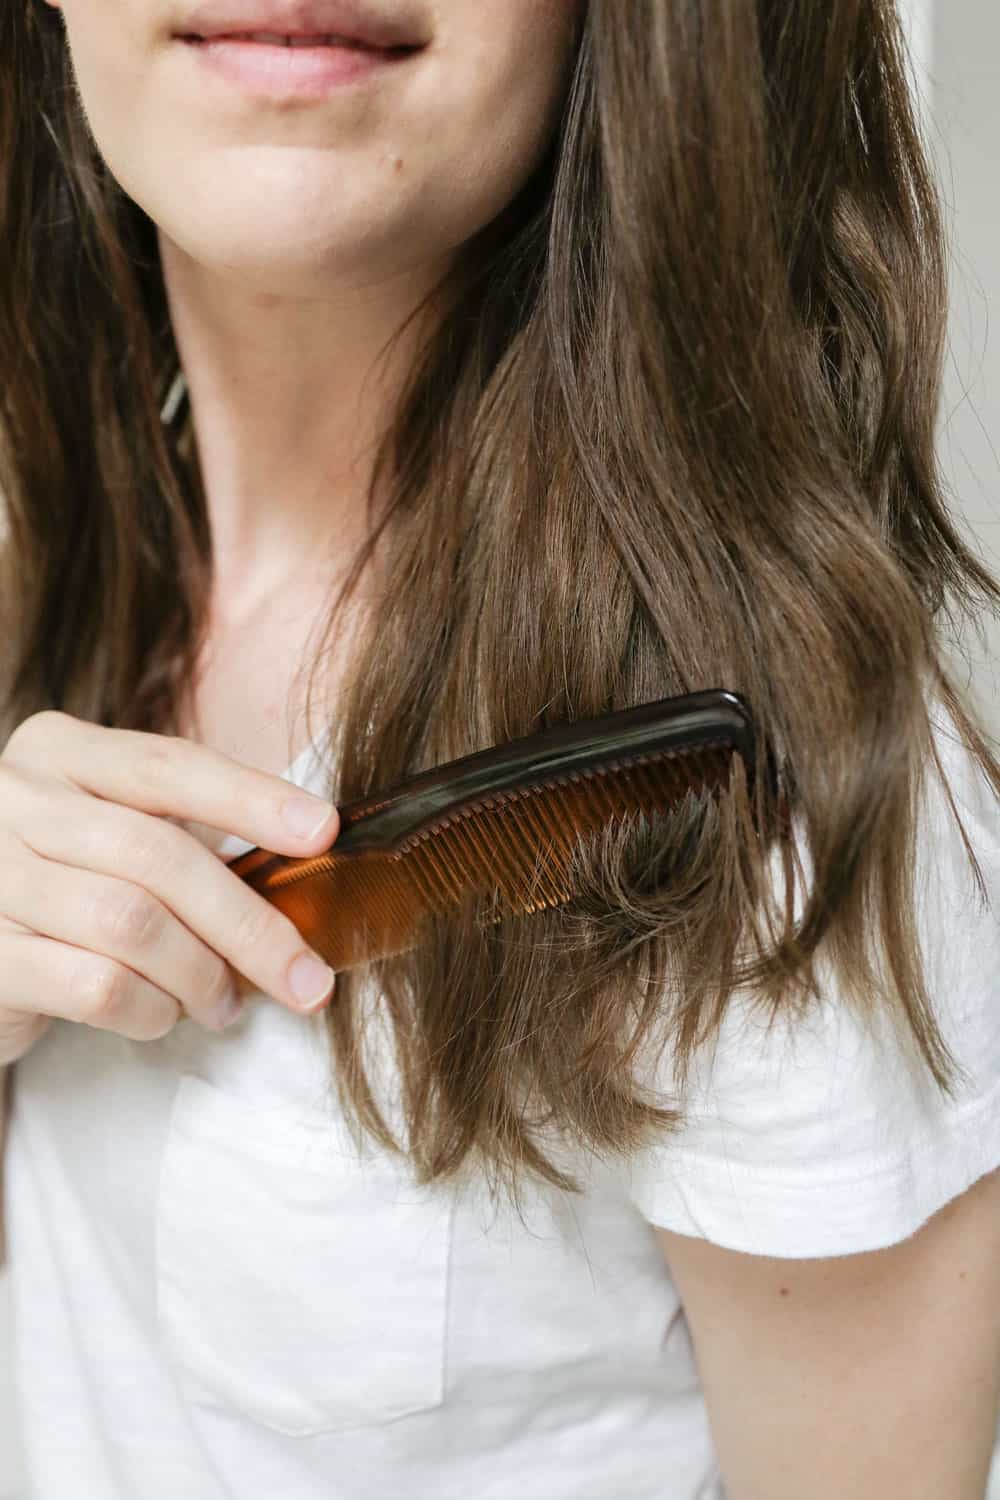 How to Use Castor Oil for Hair Growth